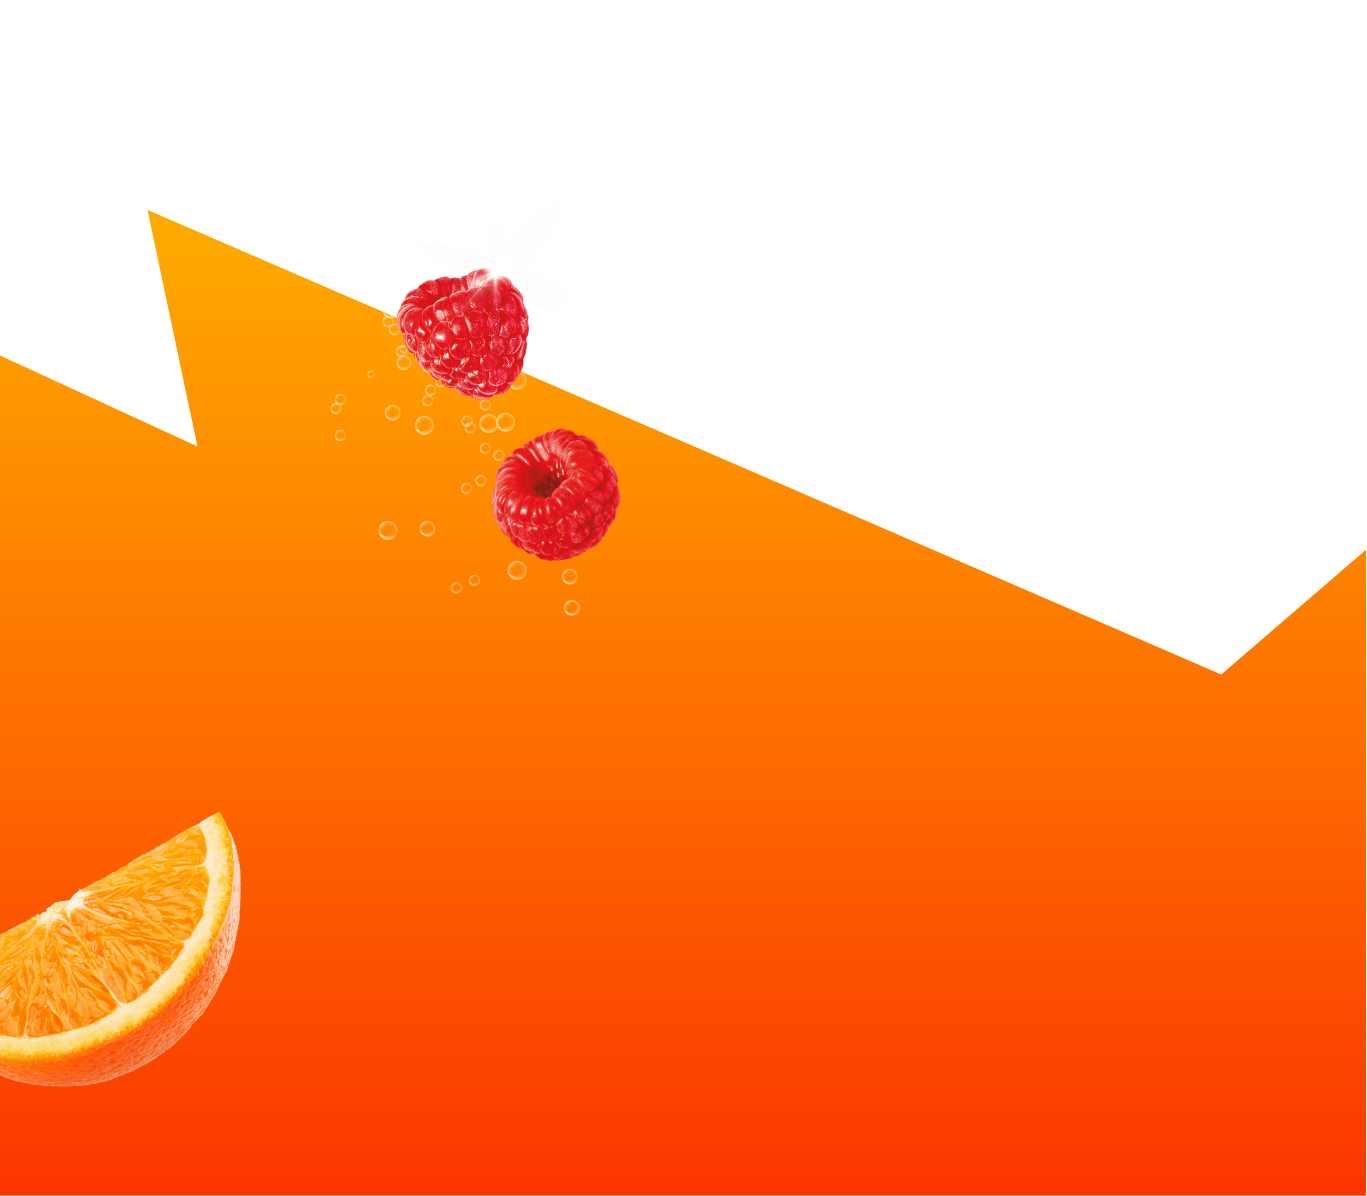 Angle design graphic with raspberries